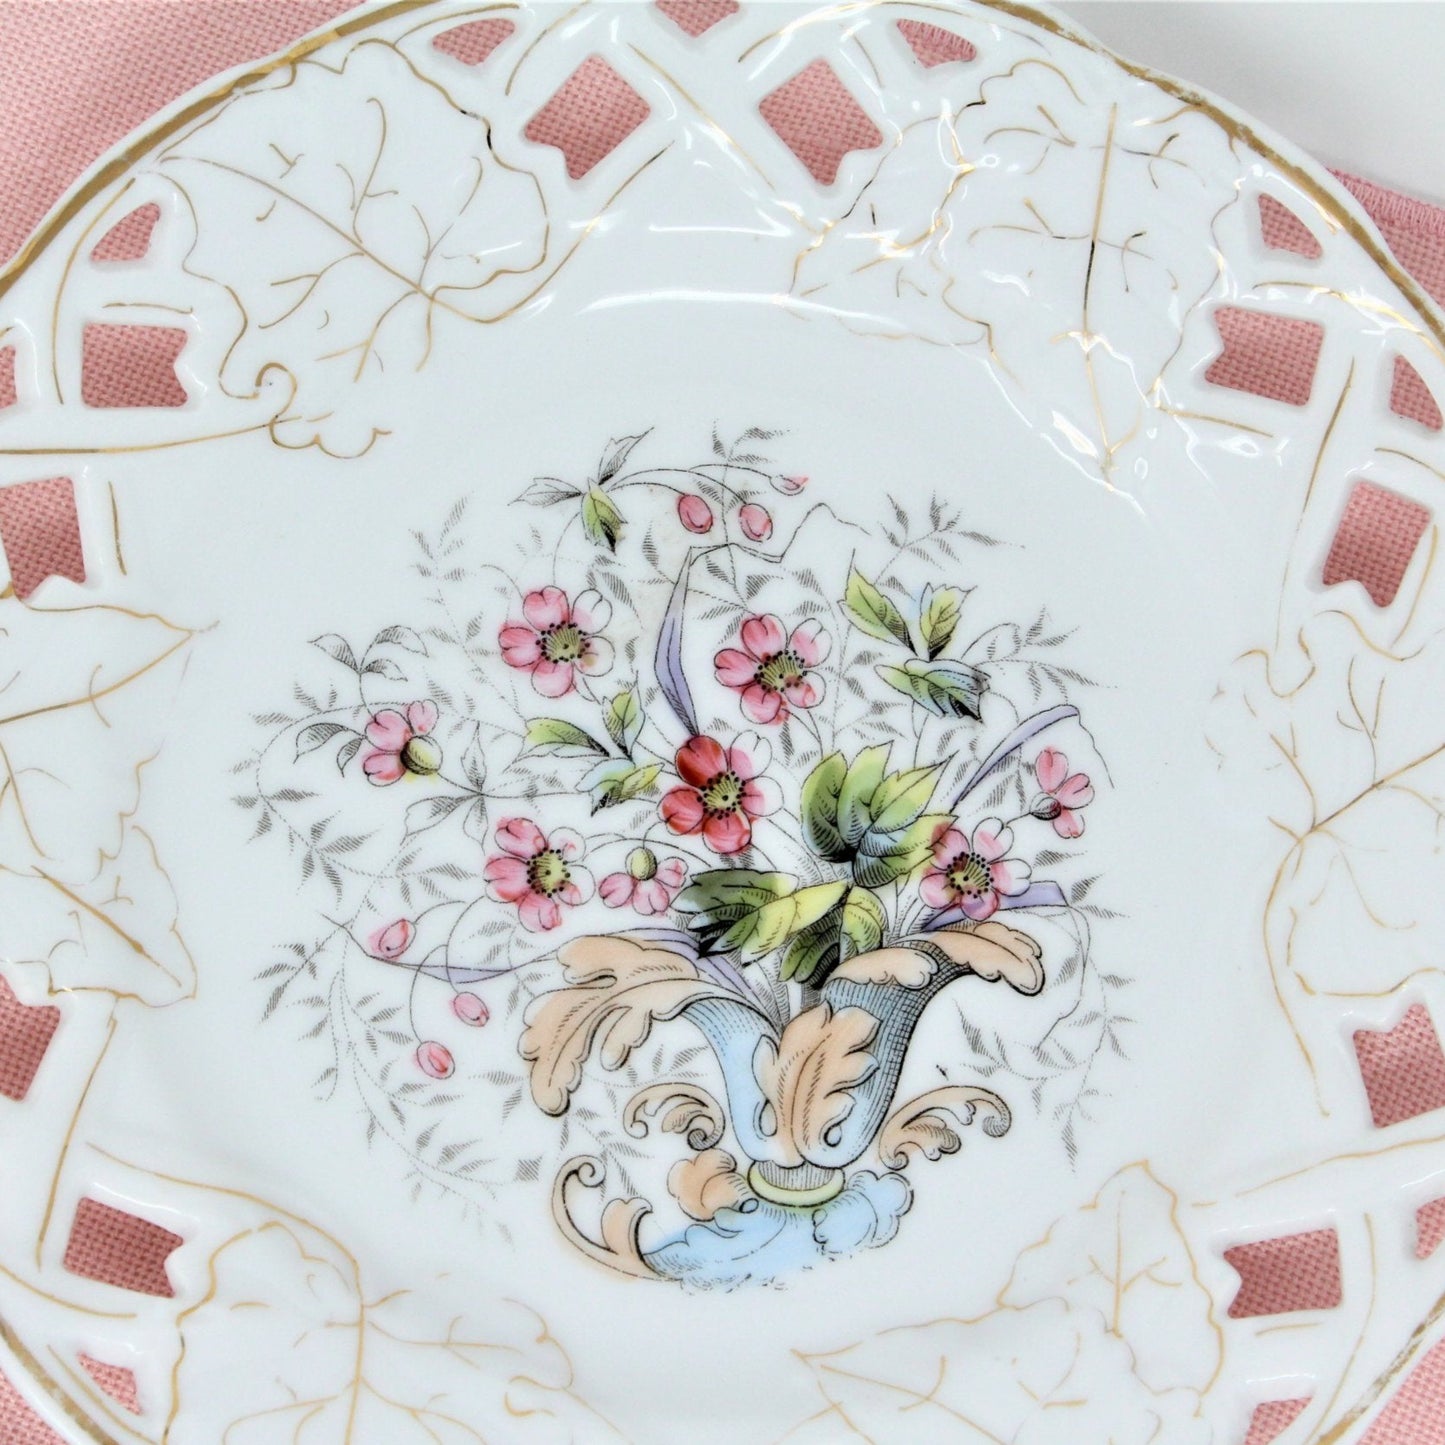 Decorative Plates, Old Paris, Hand Painted Florals, Reticulated, Set of 2, Antique